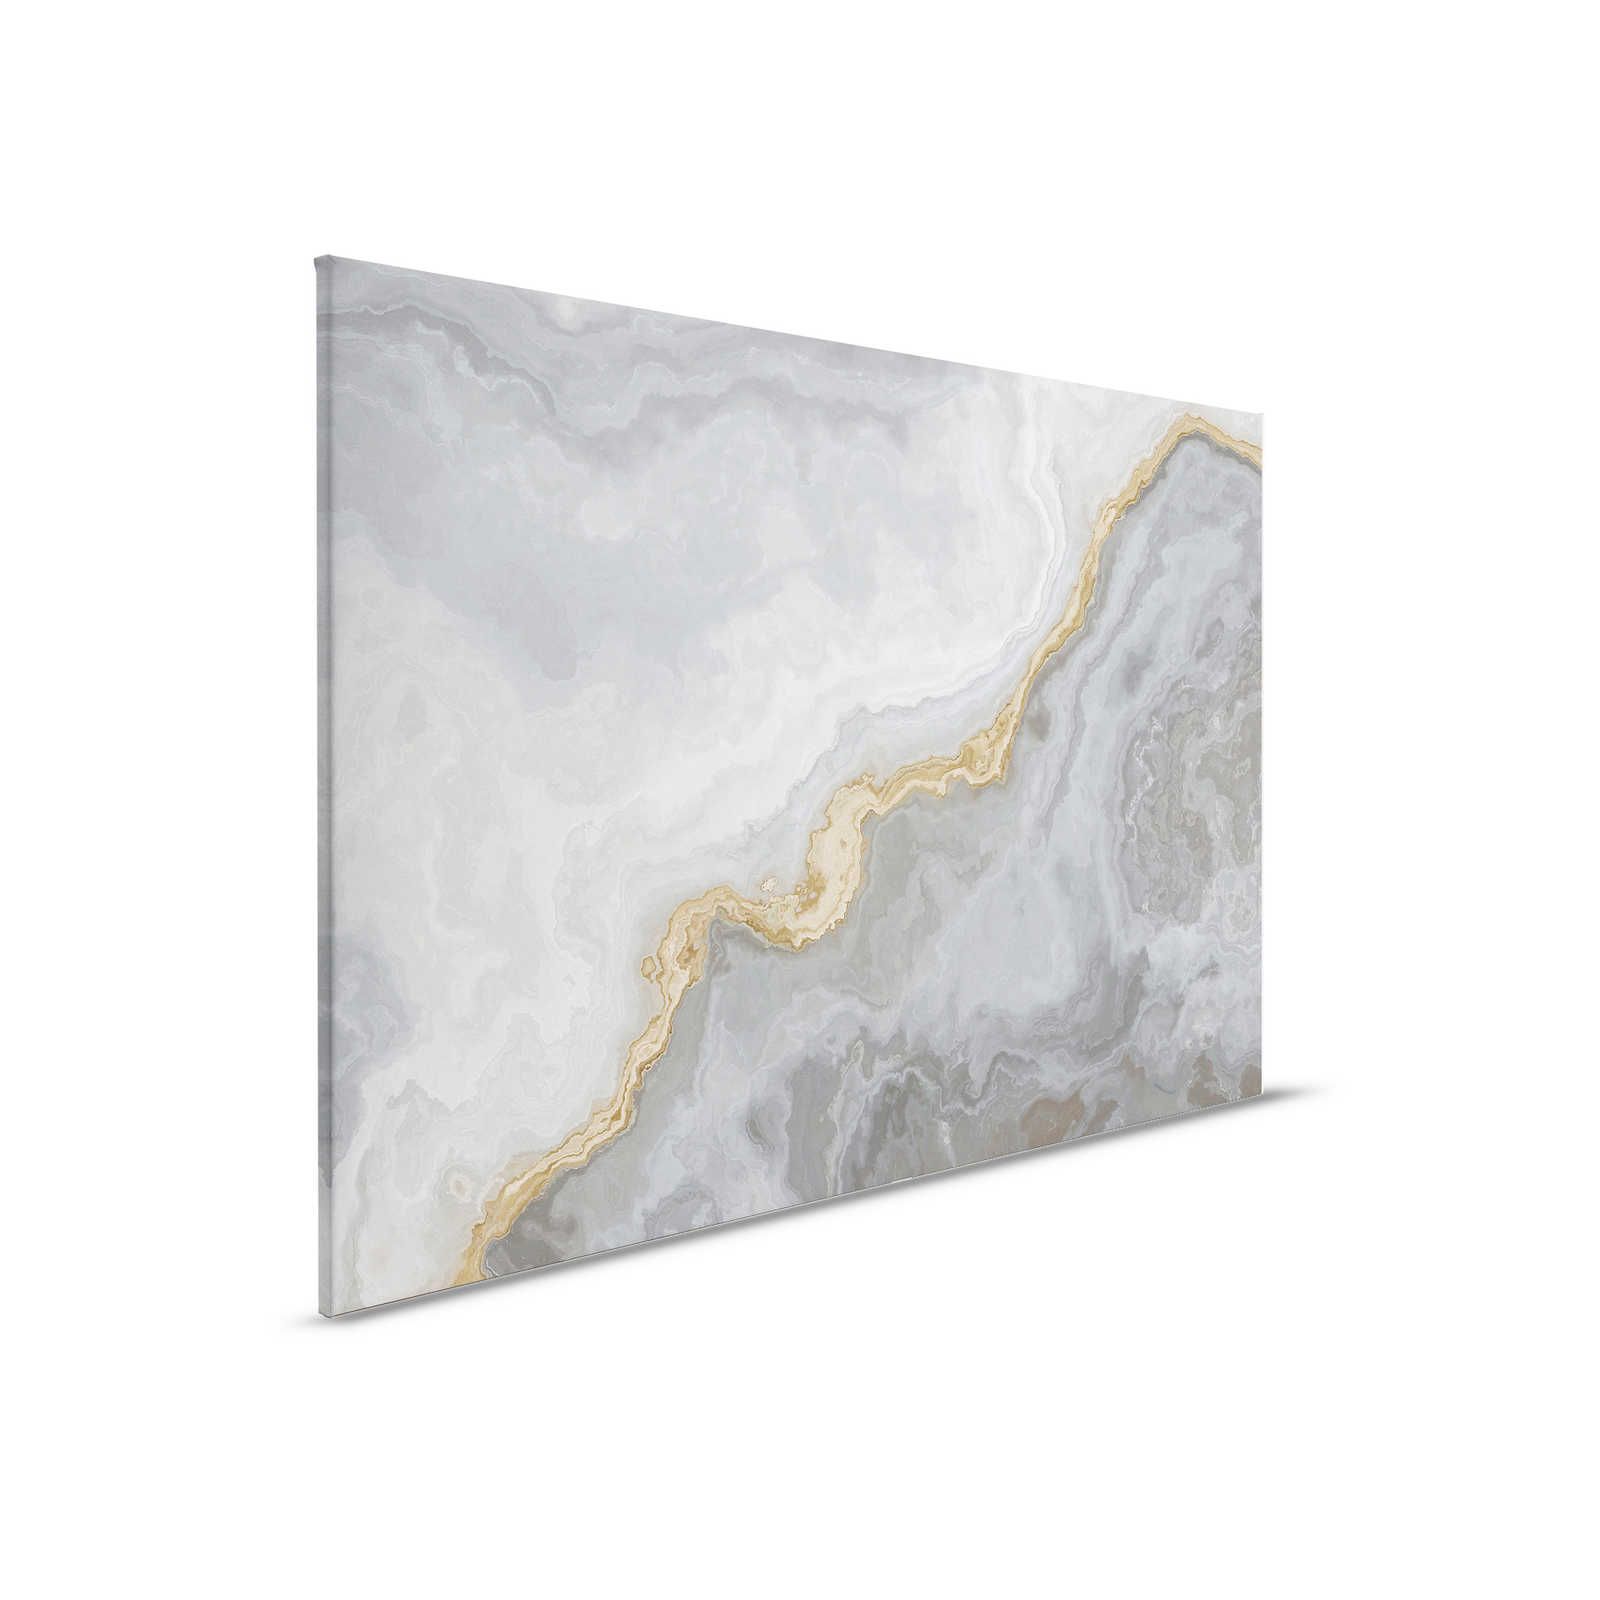         Canvas painting stone look quartz with marbling - 0,90 m x 0,60 m
    